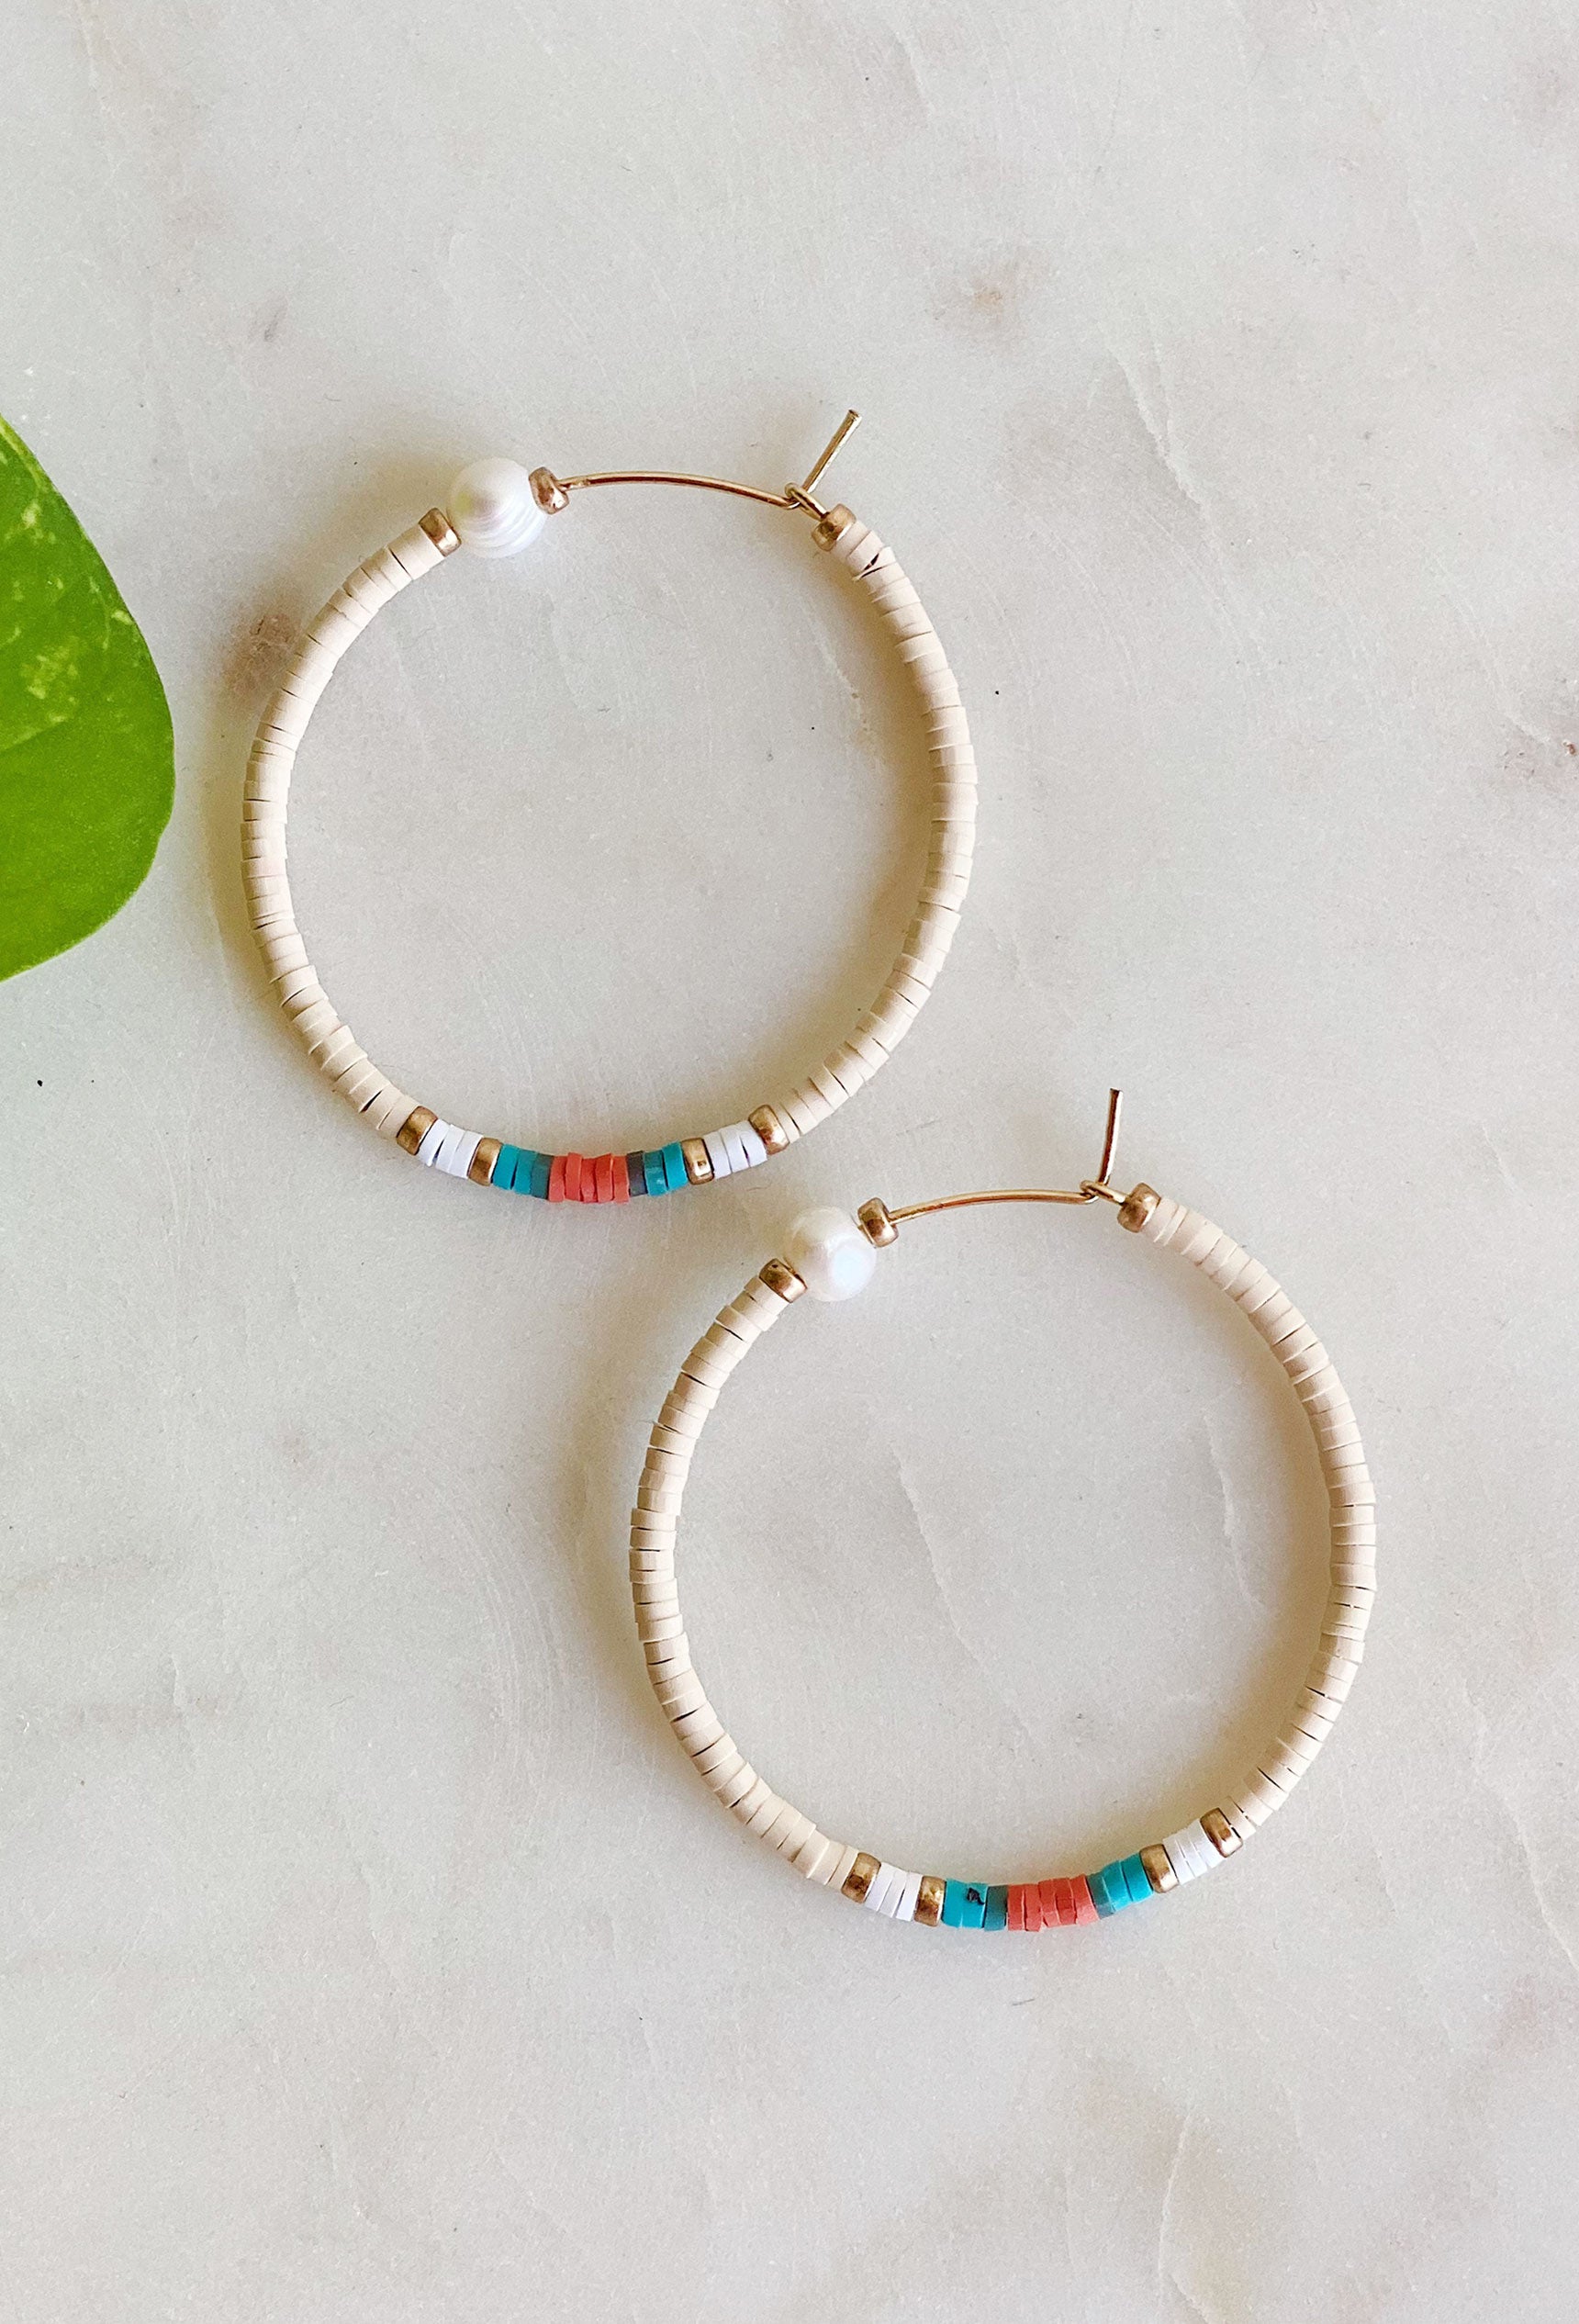 Shore Meetup Disc Hoop Earrings, Medium size hoop with a pearl detail, reign discs and gold beads